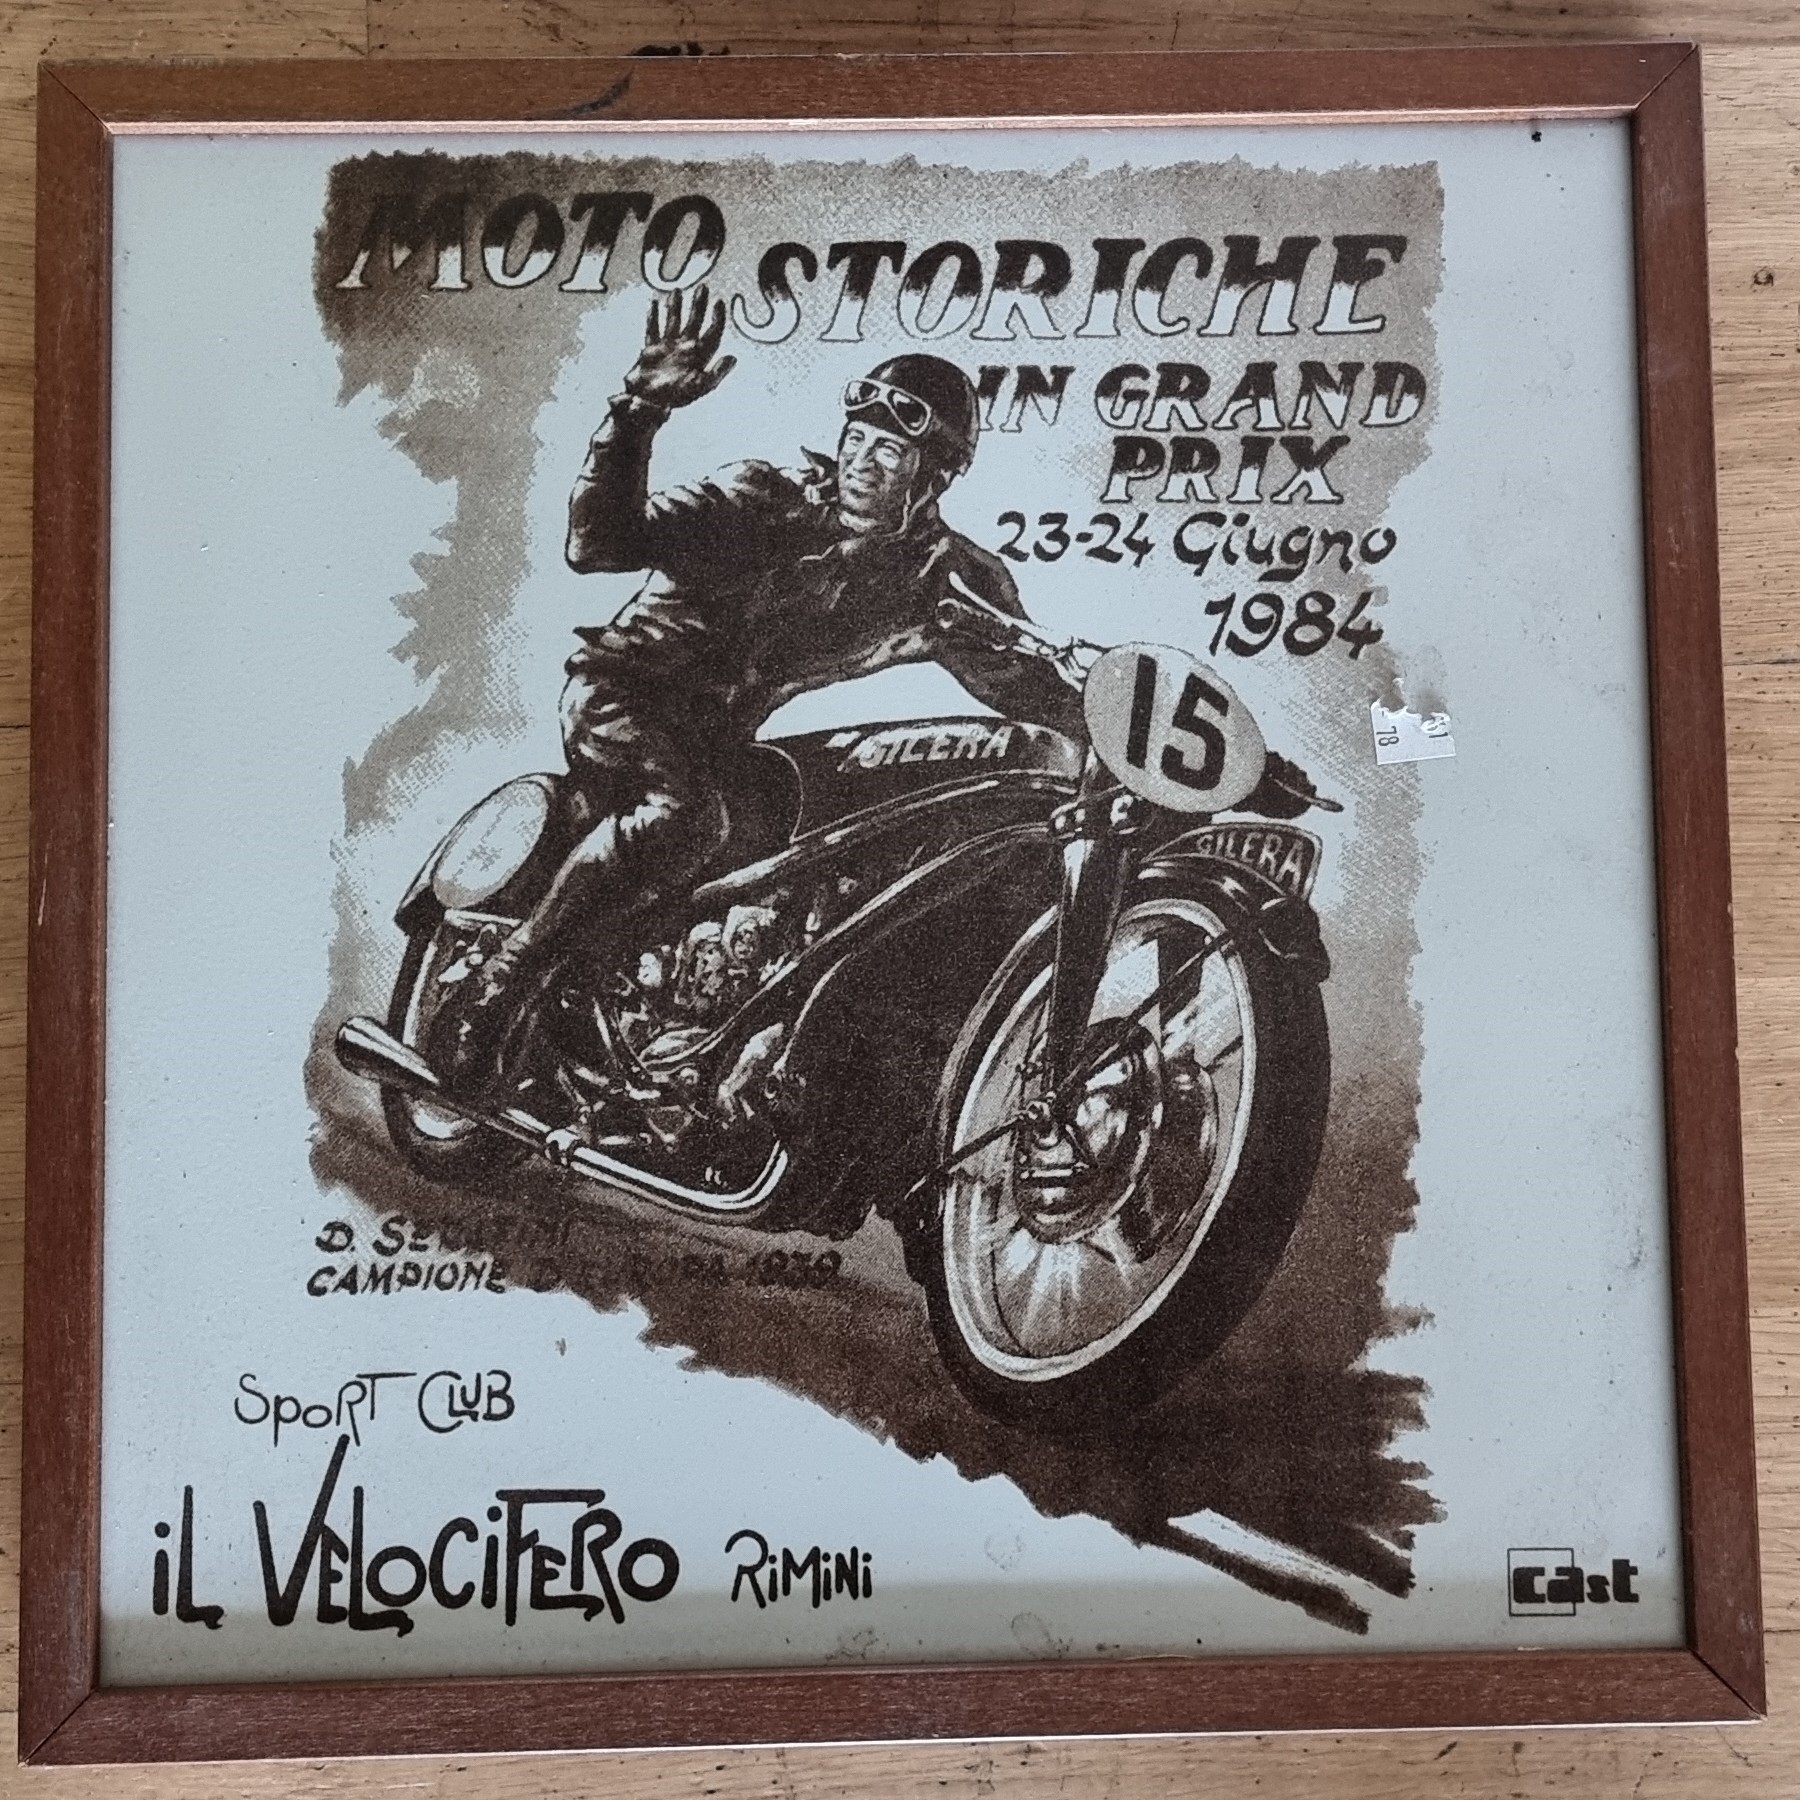 Moto Storiche 1984 Motorcycle Poster, framed, 70 x 100cm, together with a matching ceramic tile, - Image 2 of 2